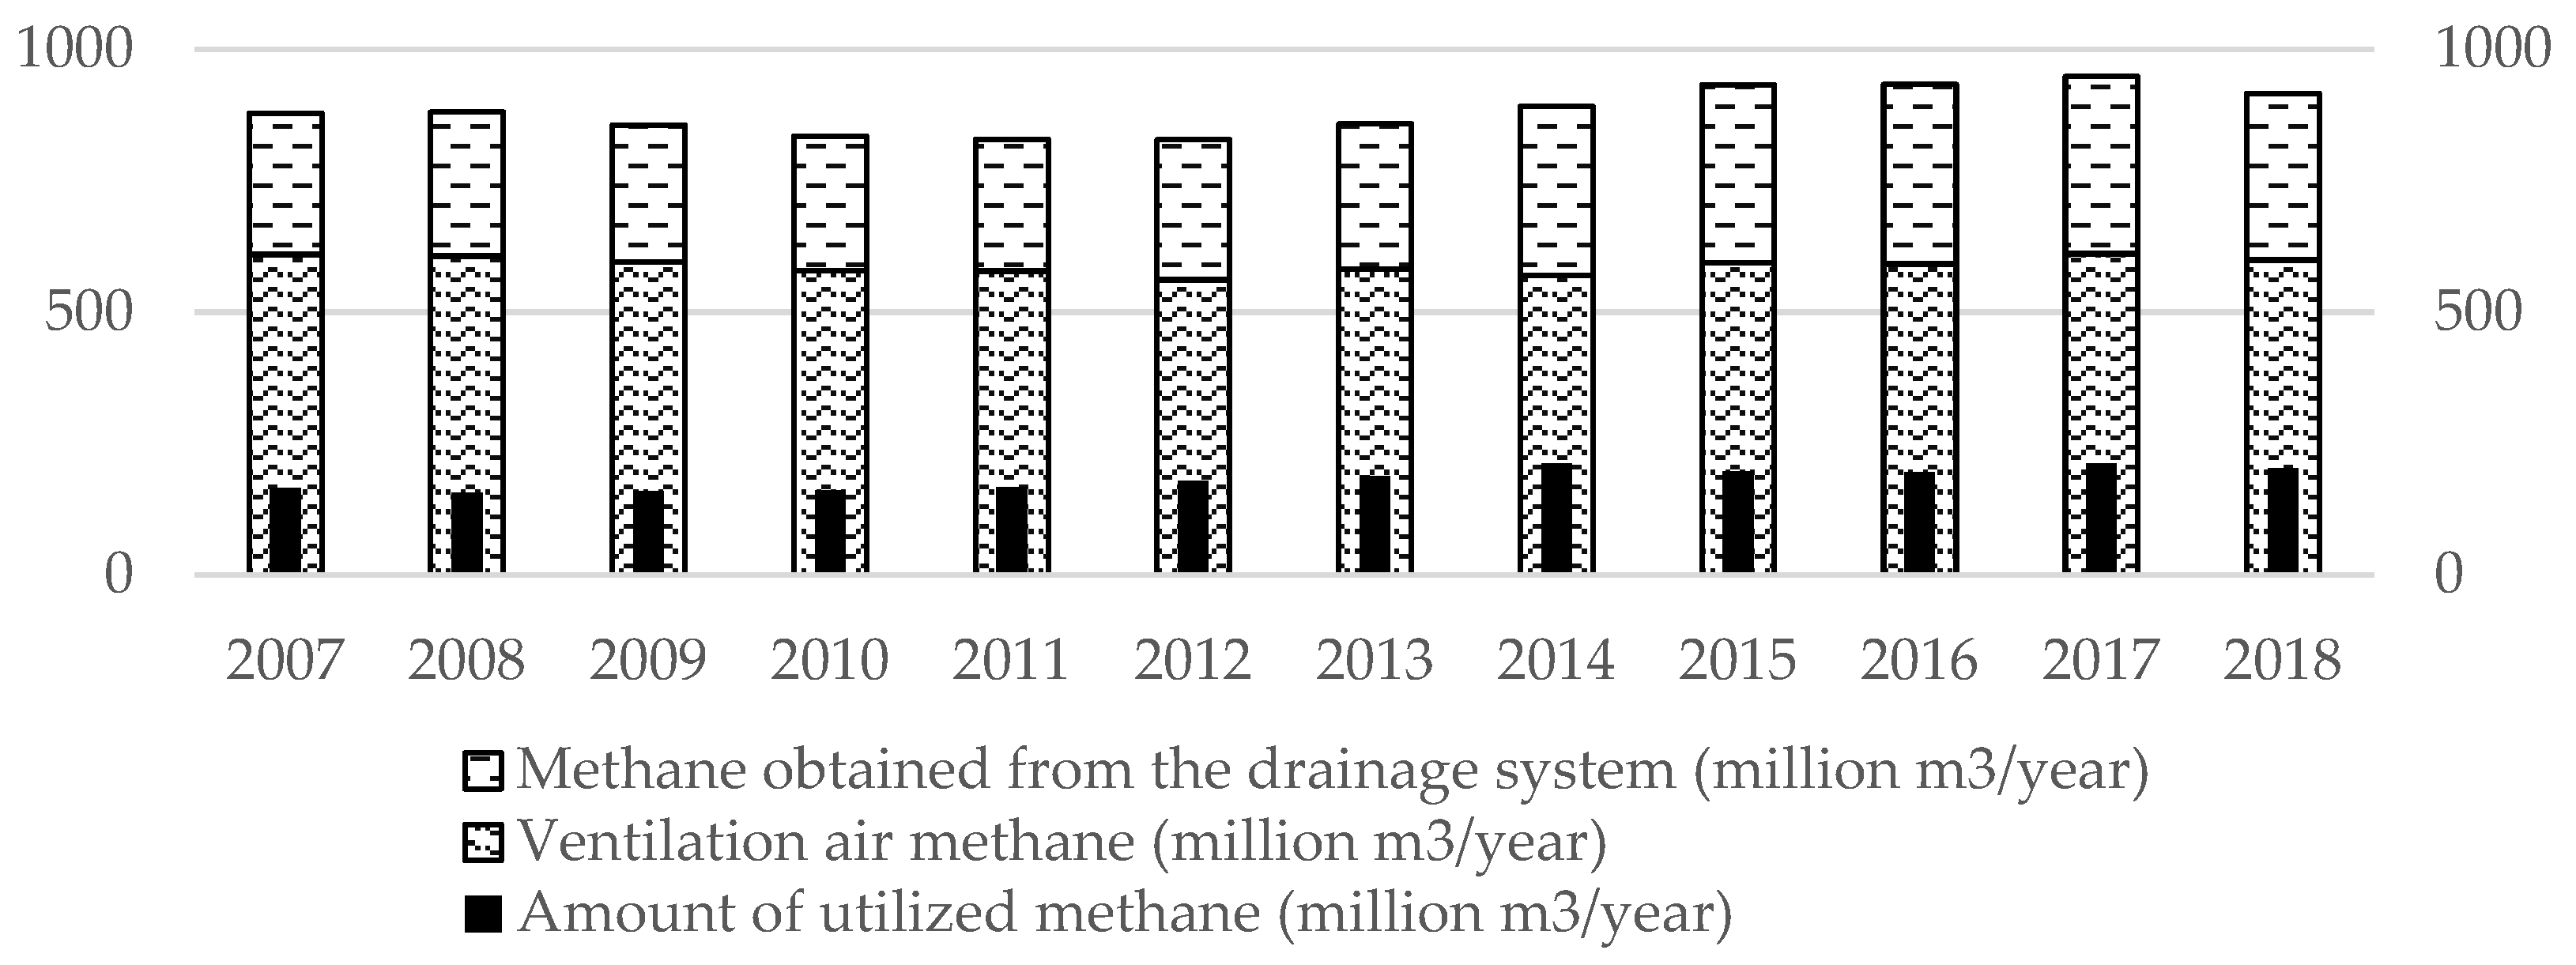 Energies | Free Full-Text | Influence of Sustainable Strategic Management  on Methane Projects as Exemplified by the Jastrz&#281;bska  Sp&oacute;&#322;ka W&#281;glowa S.A. Mining Company